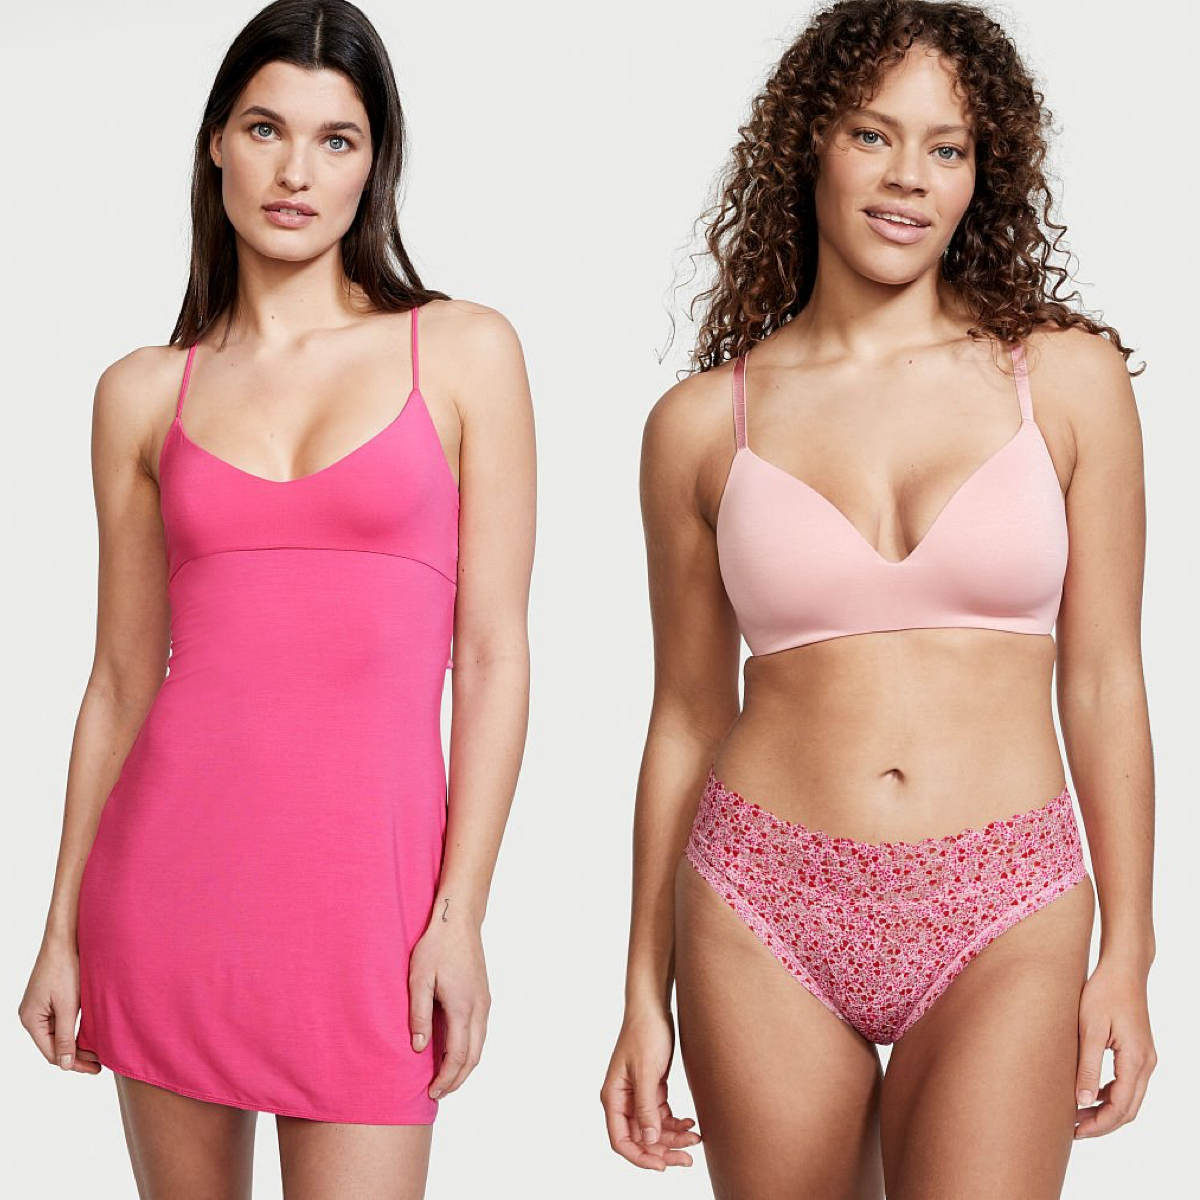 Victoria's Secret Clearance Sale – Up to 60% Off!